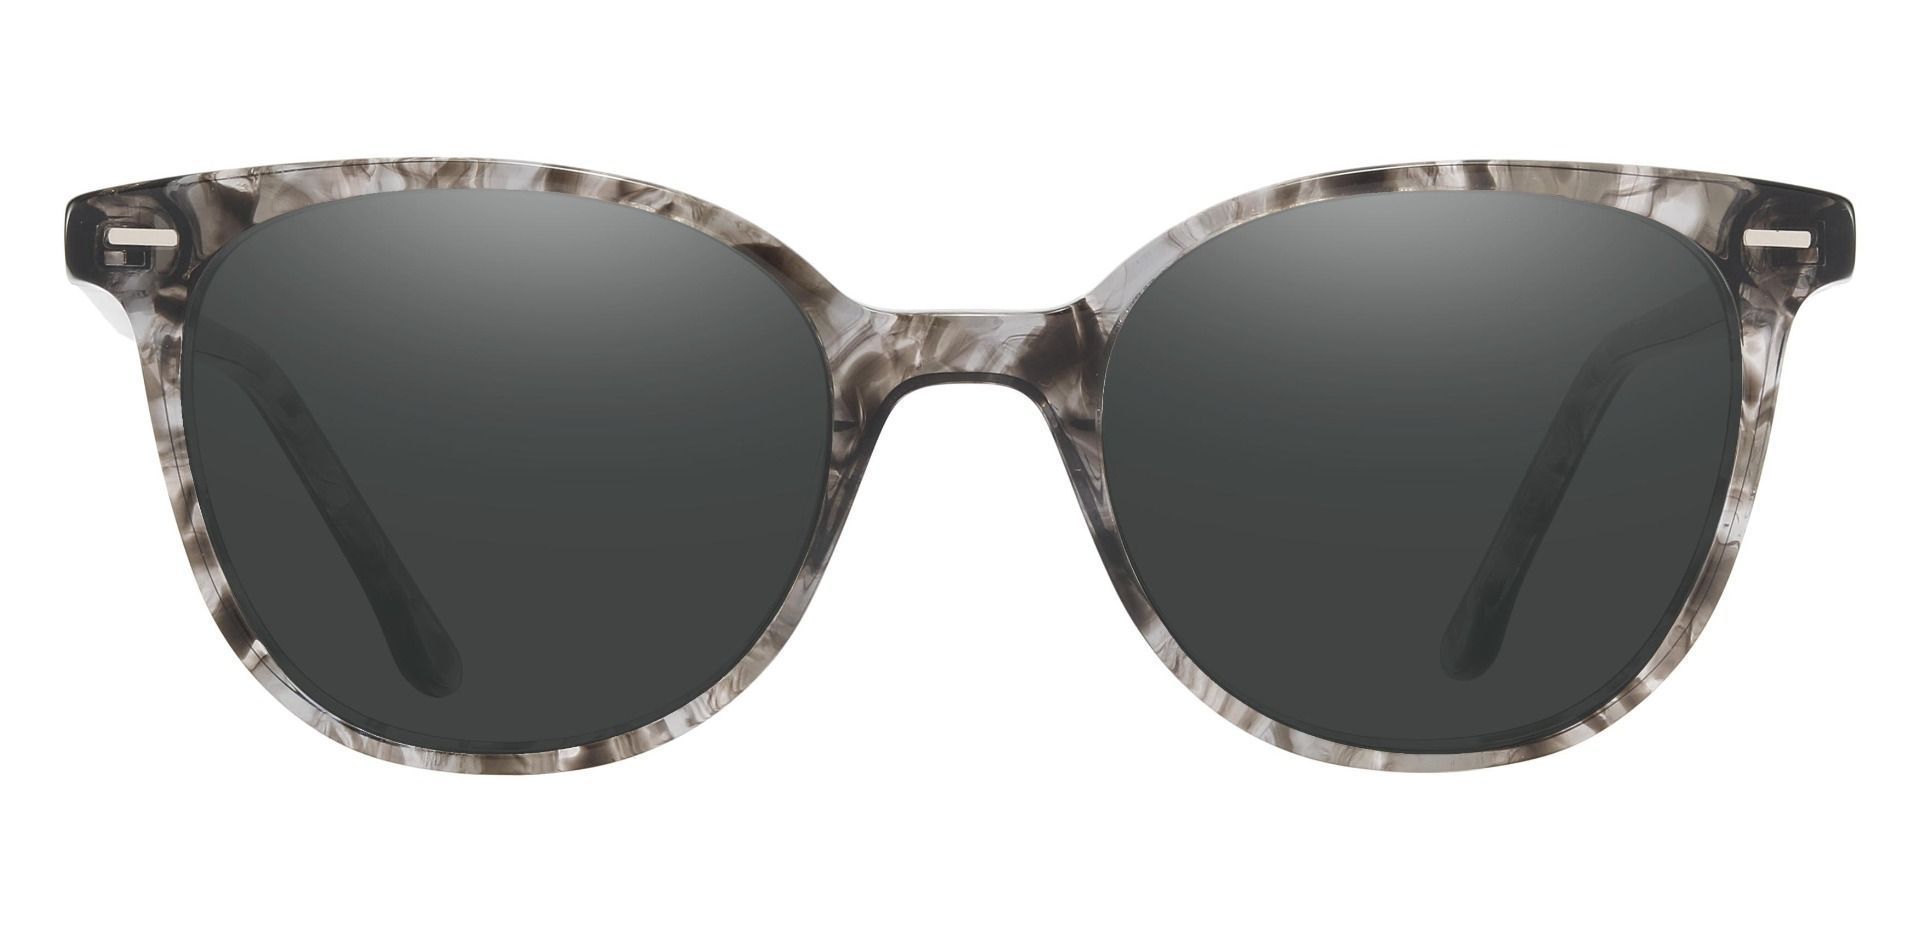 Chili Oval Reading Sunglasses - Gray Frame With Gray Lenses